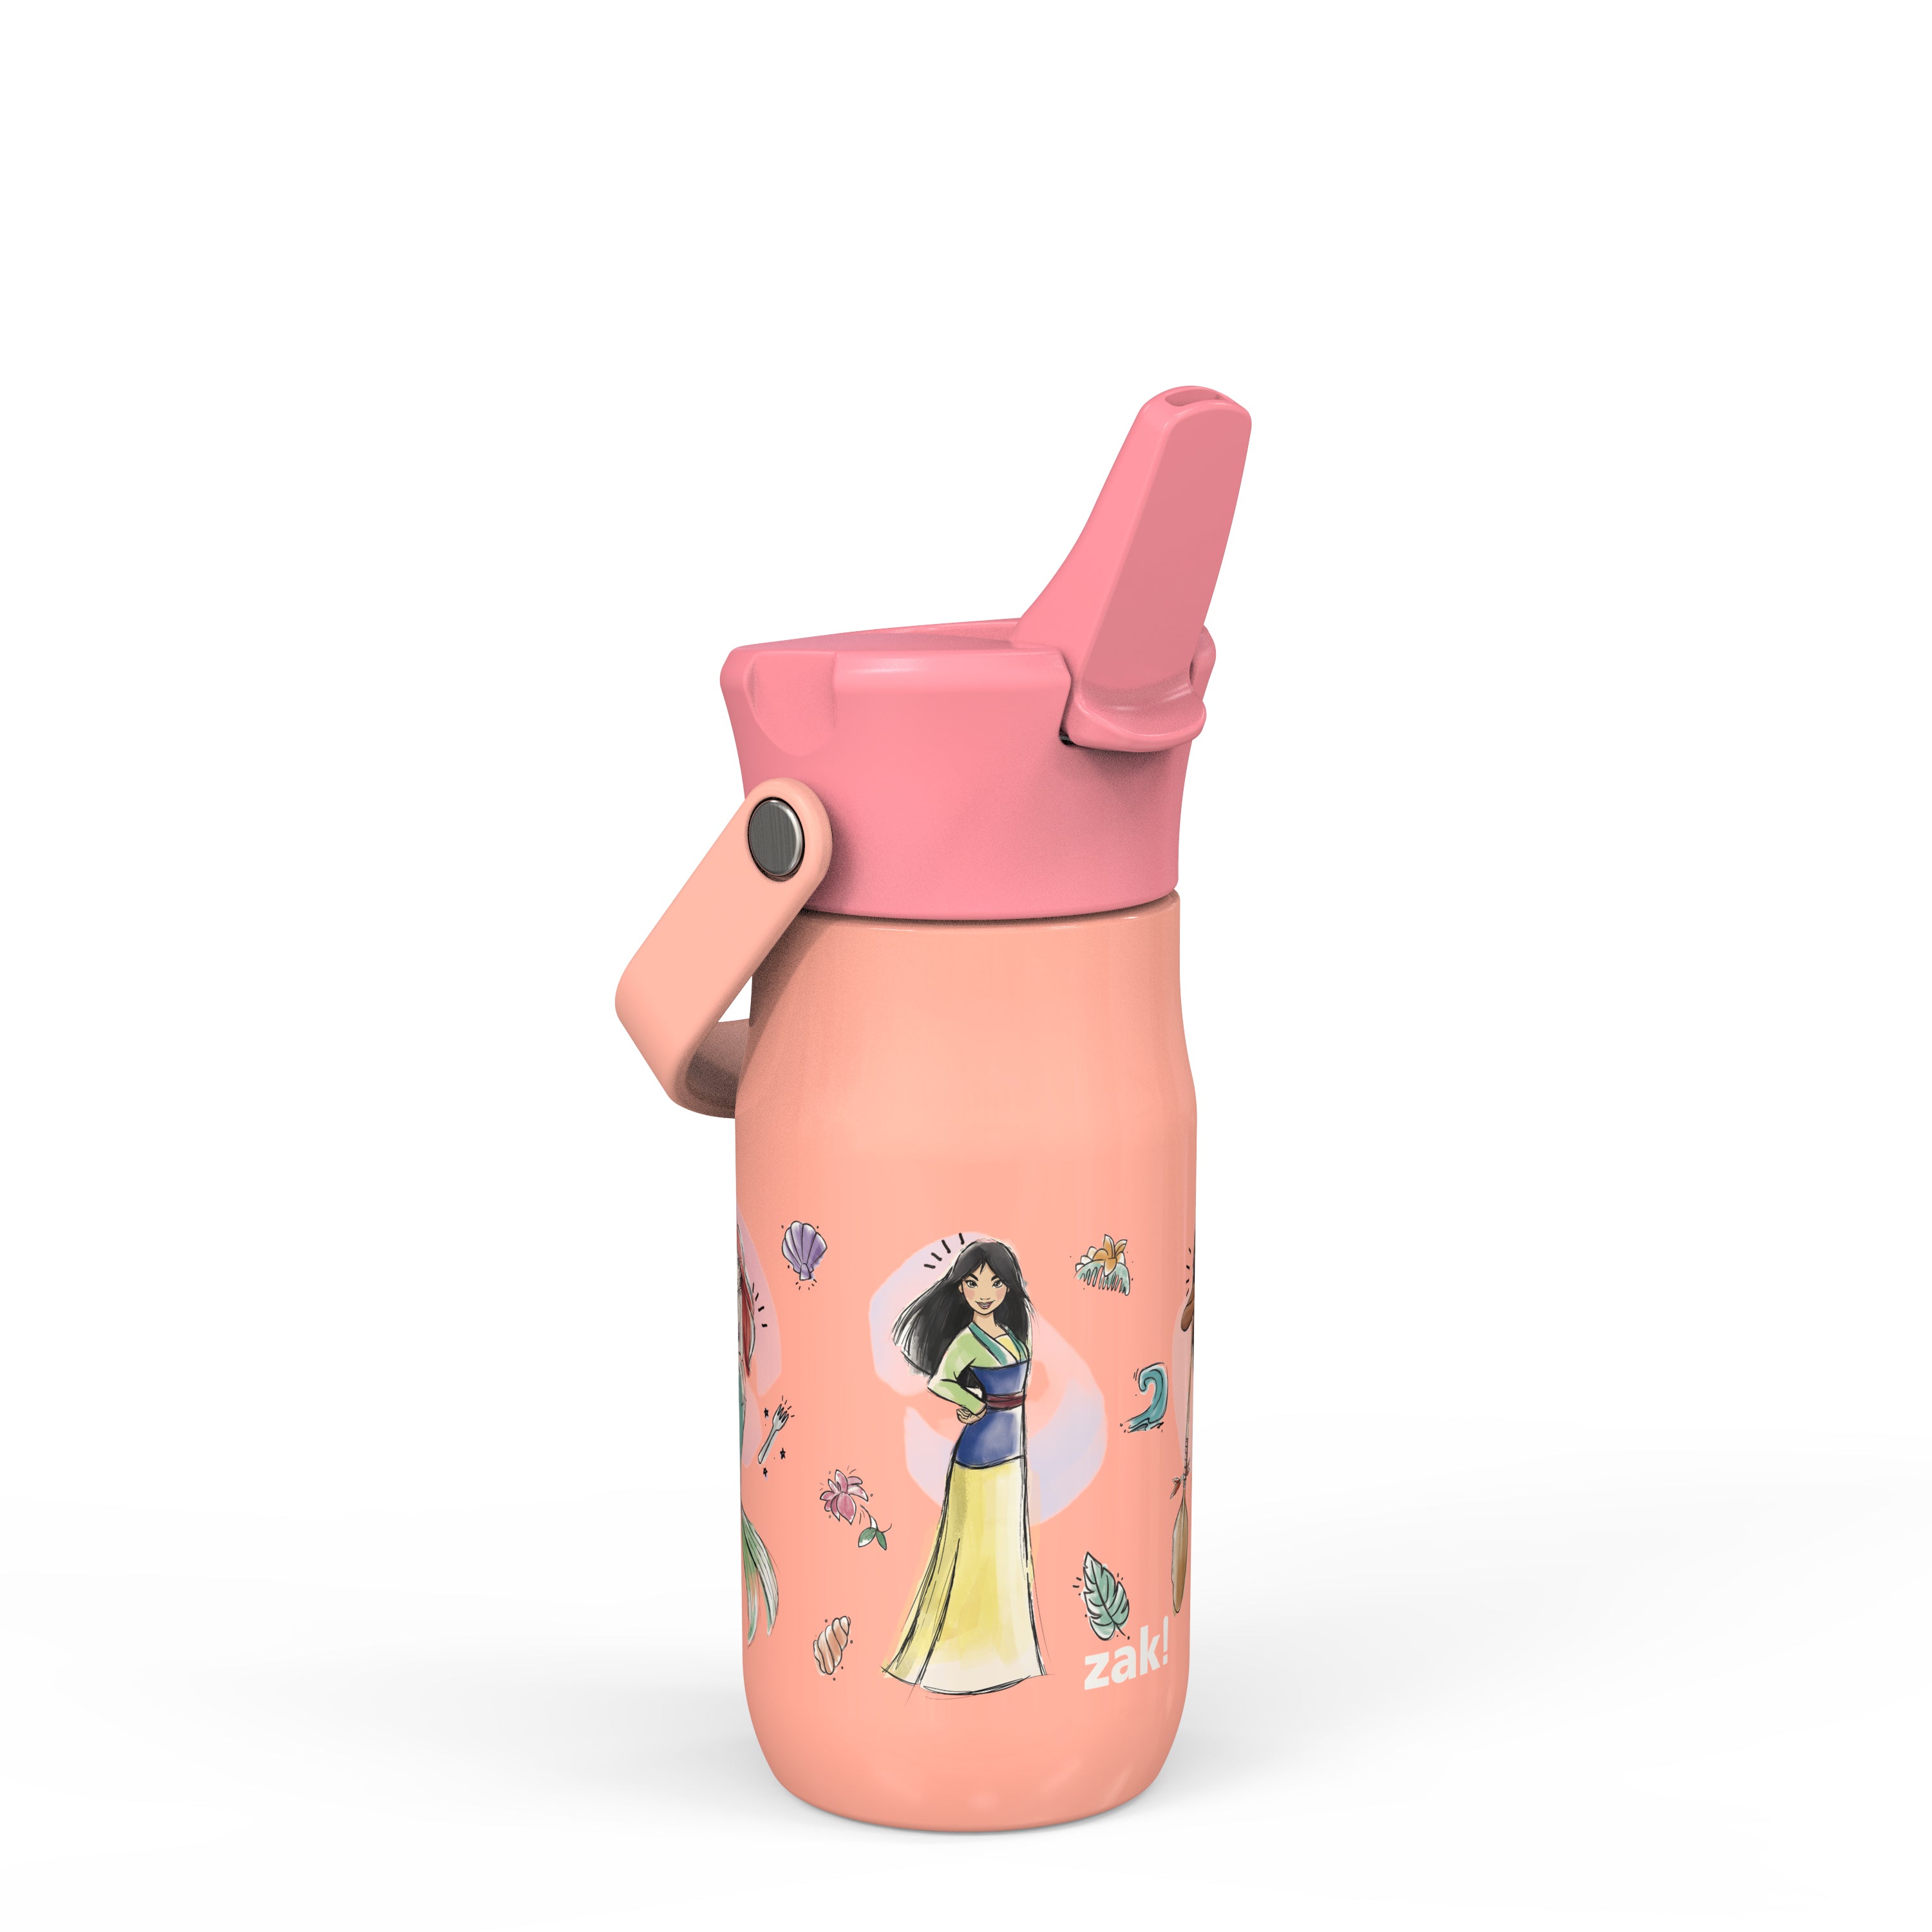 Disney Princess Harmony Recycled Stainless Steel Kids Water Bottle with Straw Spout, 14 ounces